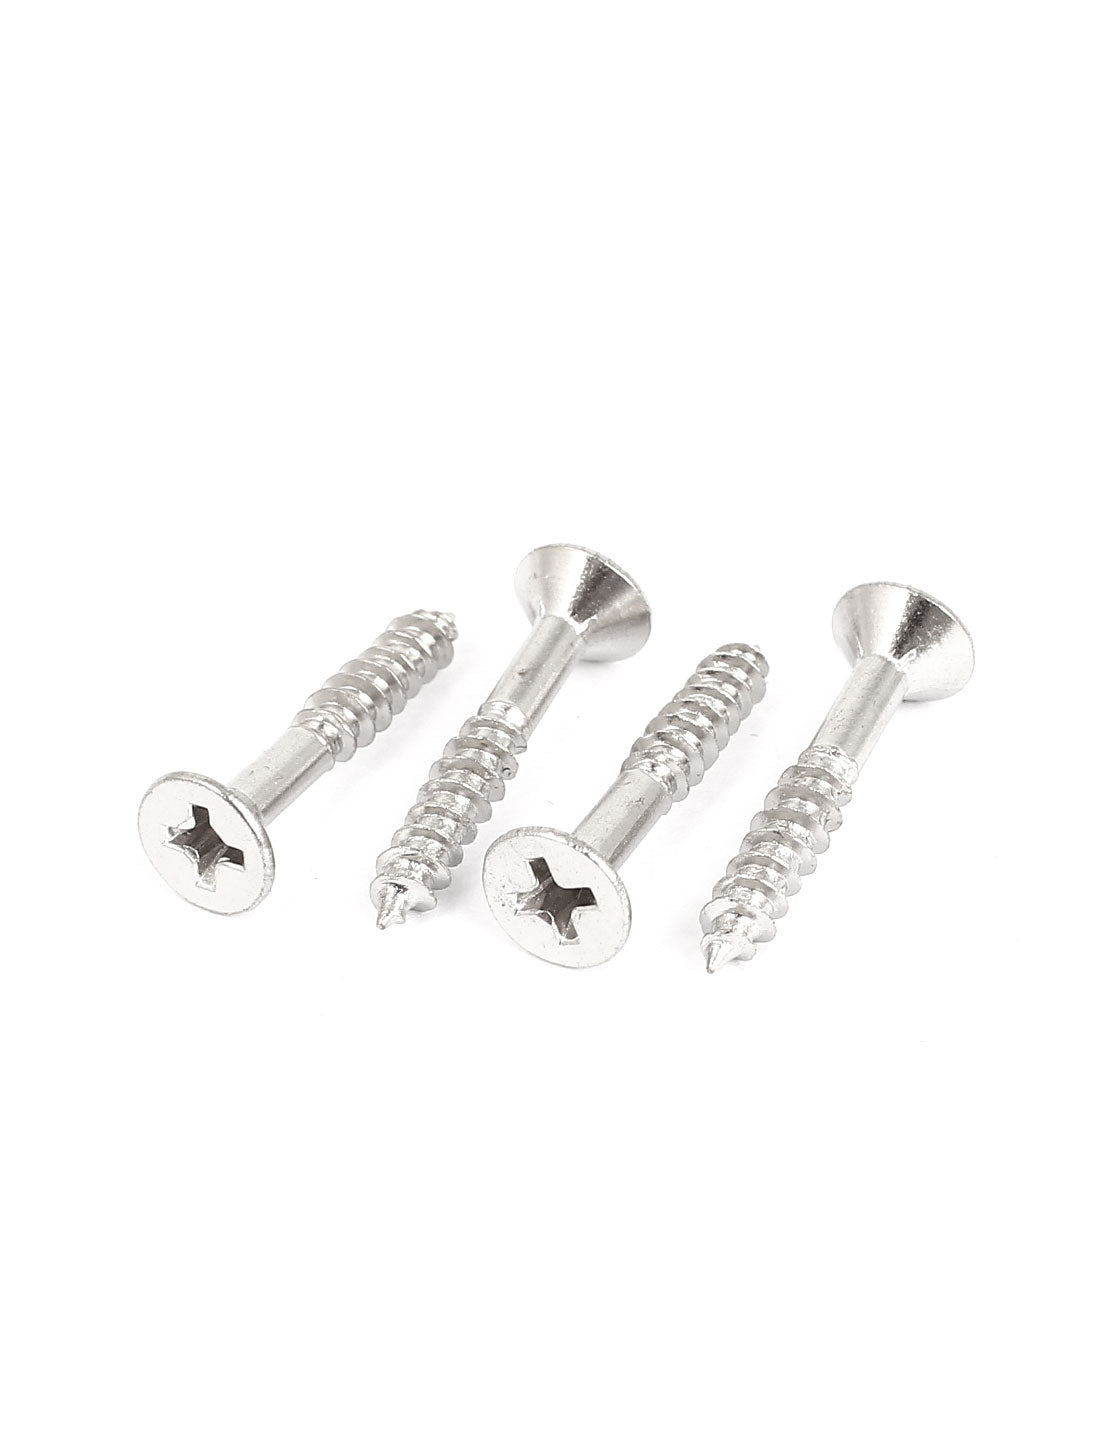 uxcell Uxcell 18mm Dia Threaded Bales Catch Ball Mortice Door Cupboard Spring Roller Latch